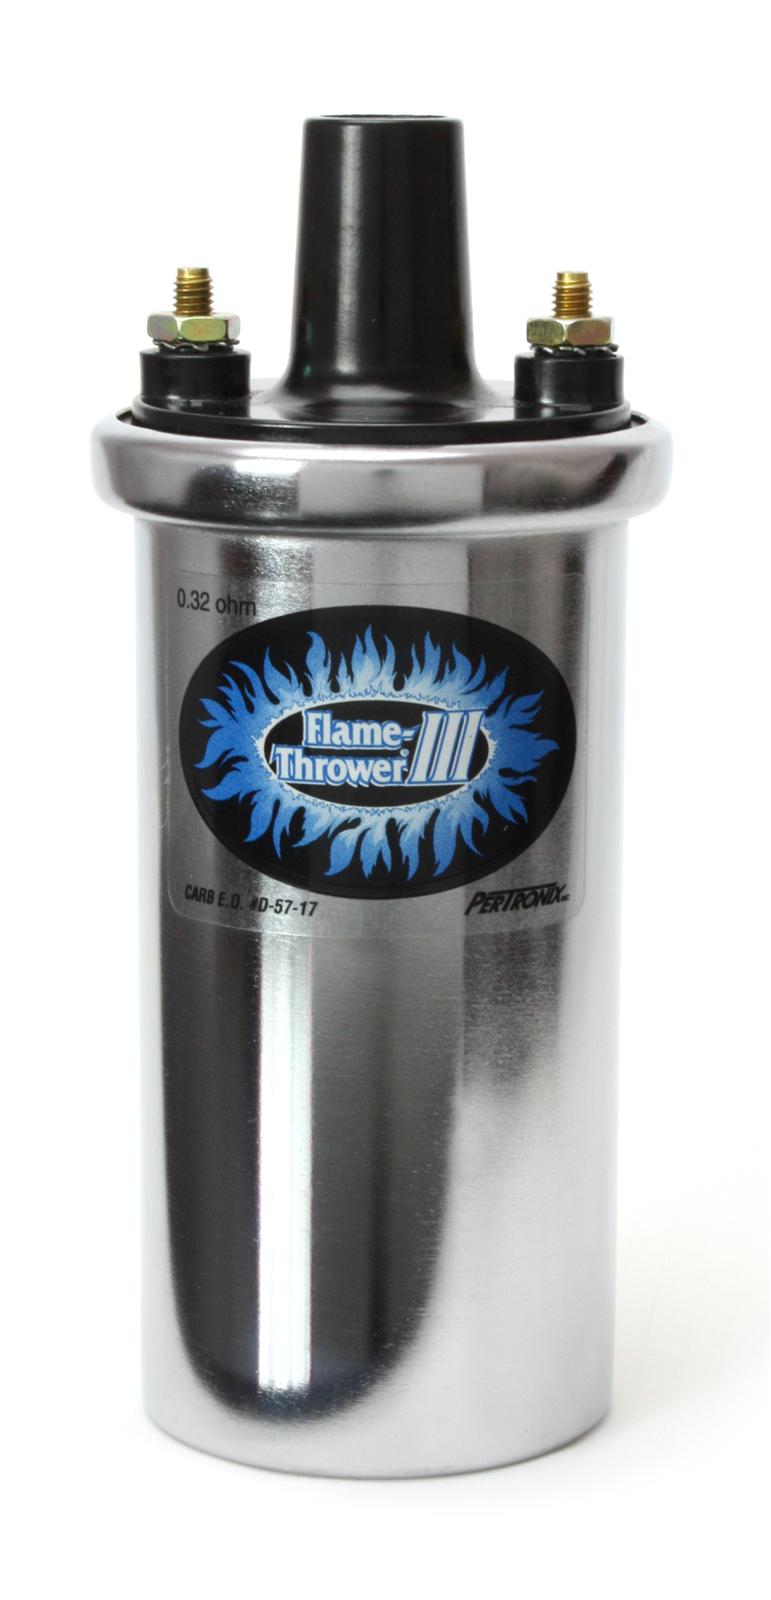 PERTRONIX FLAME-THROWER III COIL- OIL FILLED - CHROME